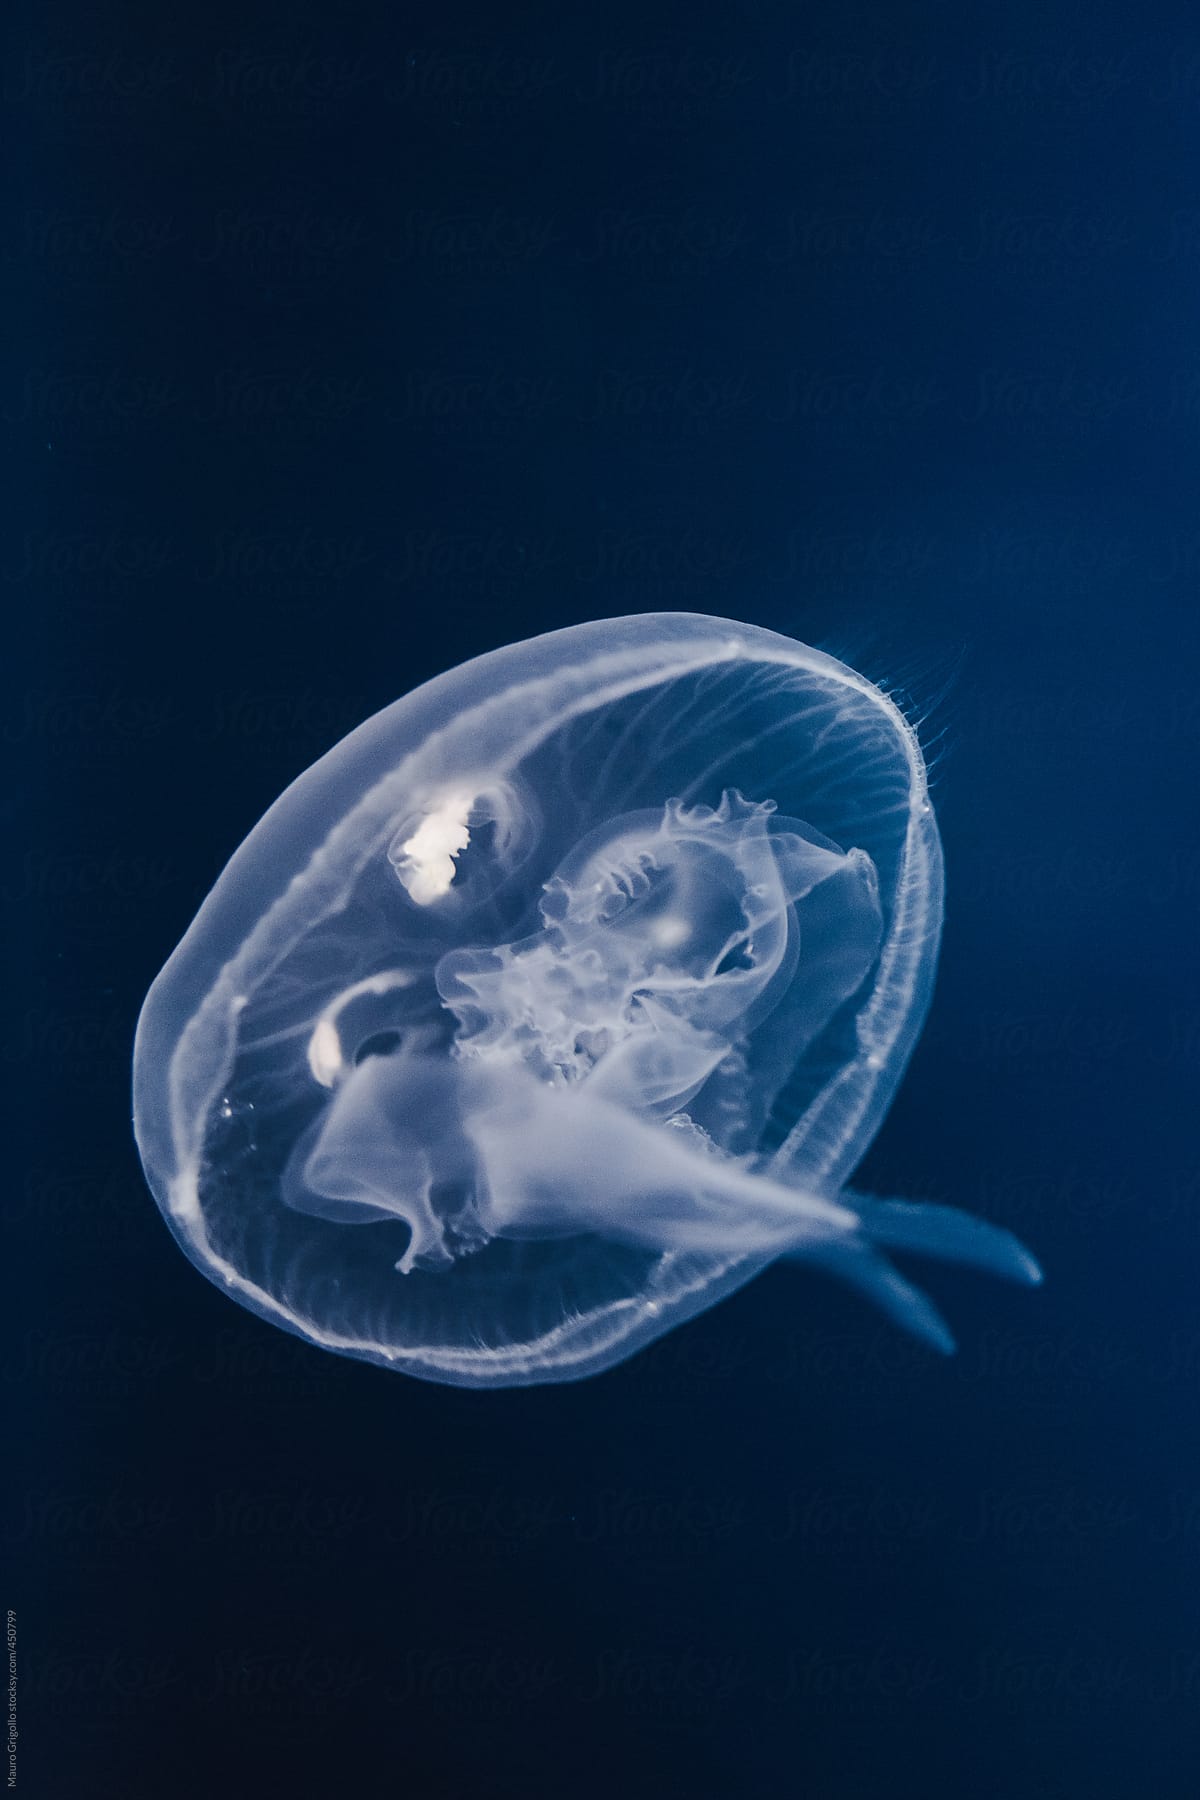 Jellyfish float in water